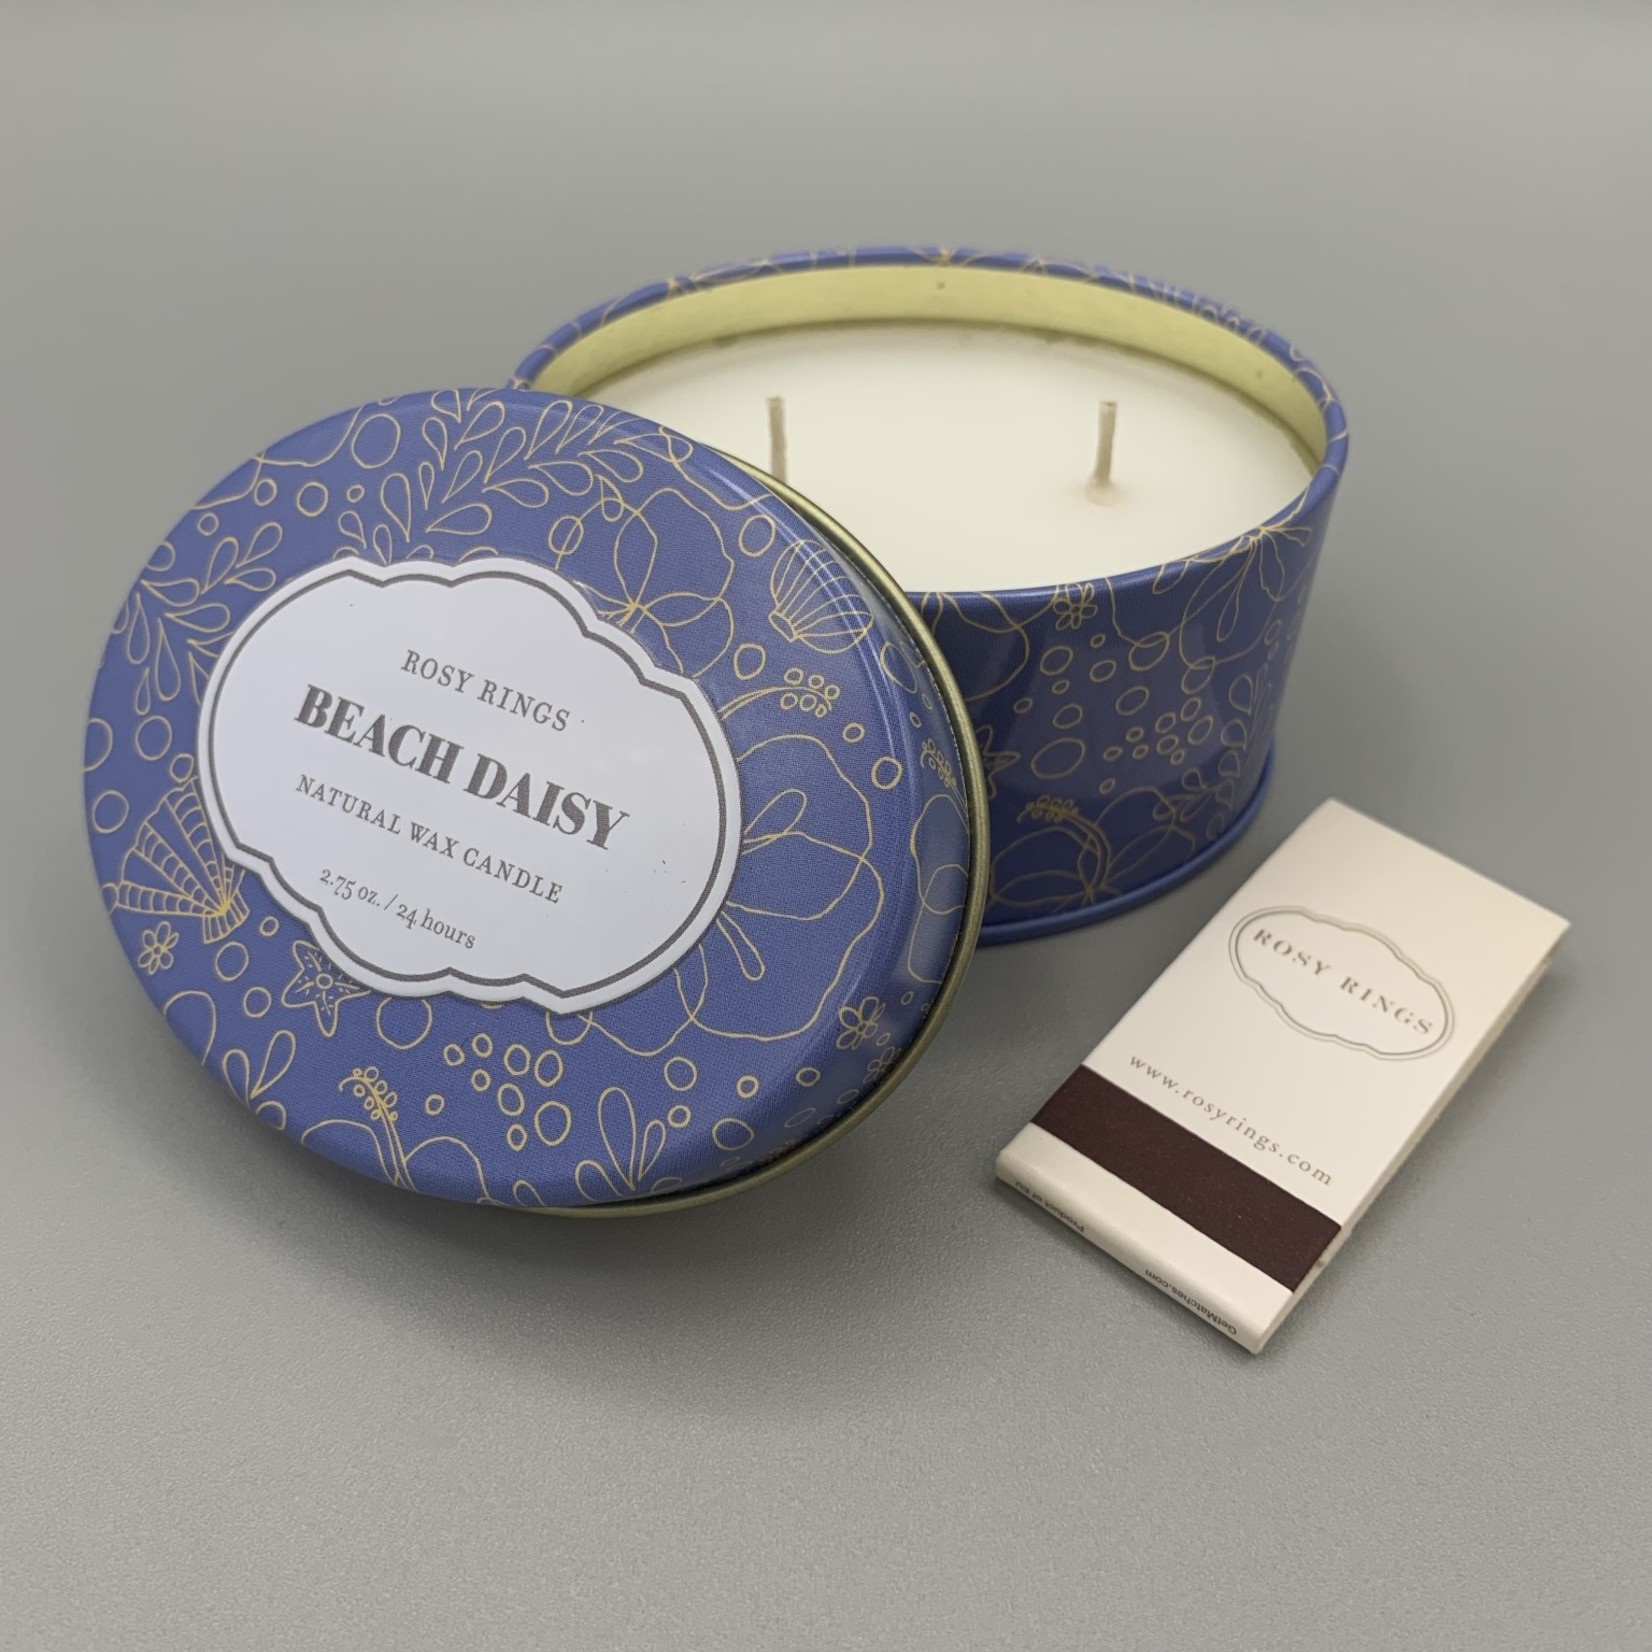 Rosy Rings Natural Wax Candle in Travel Tin, 2.75 oz -Beach Daisy